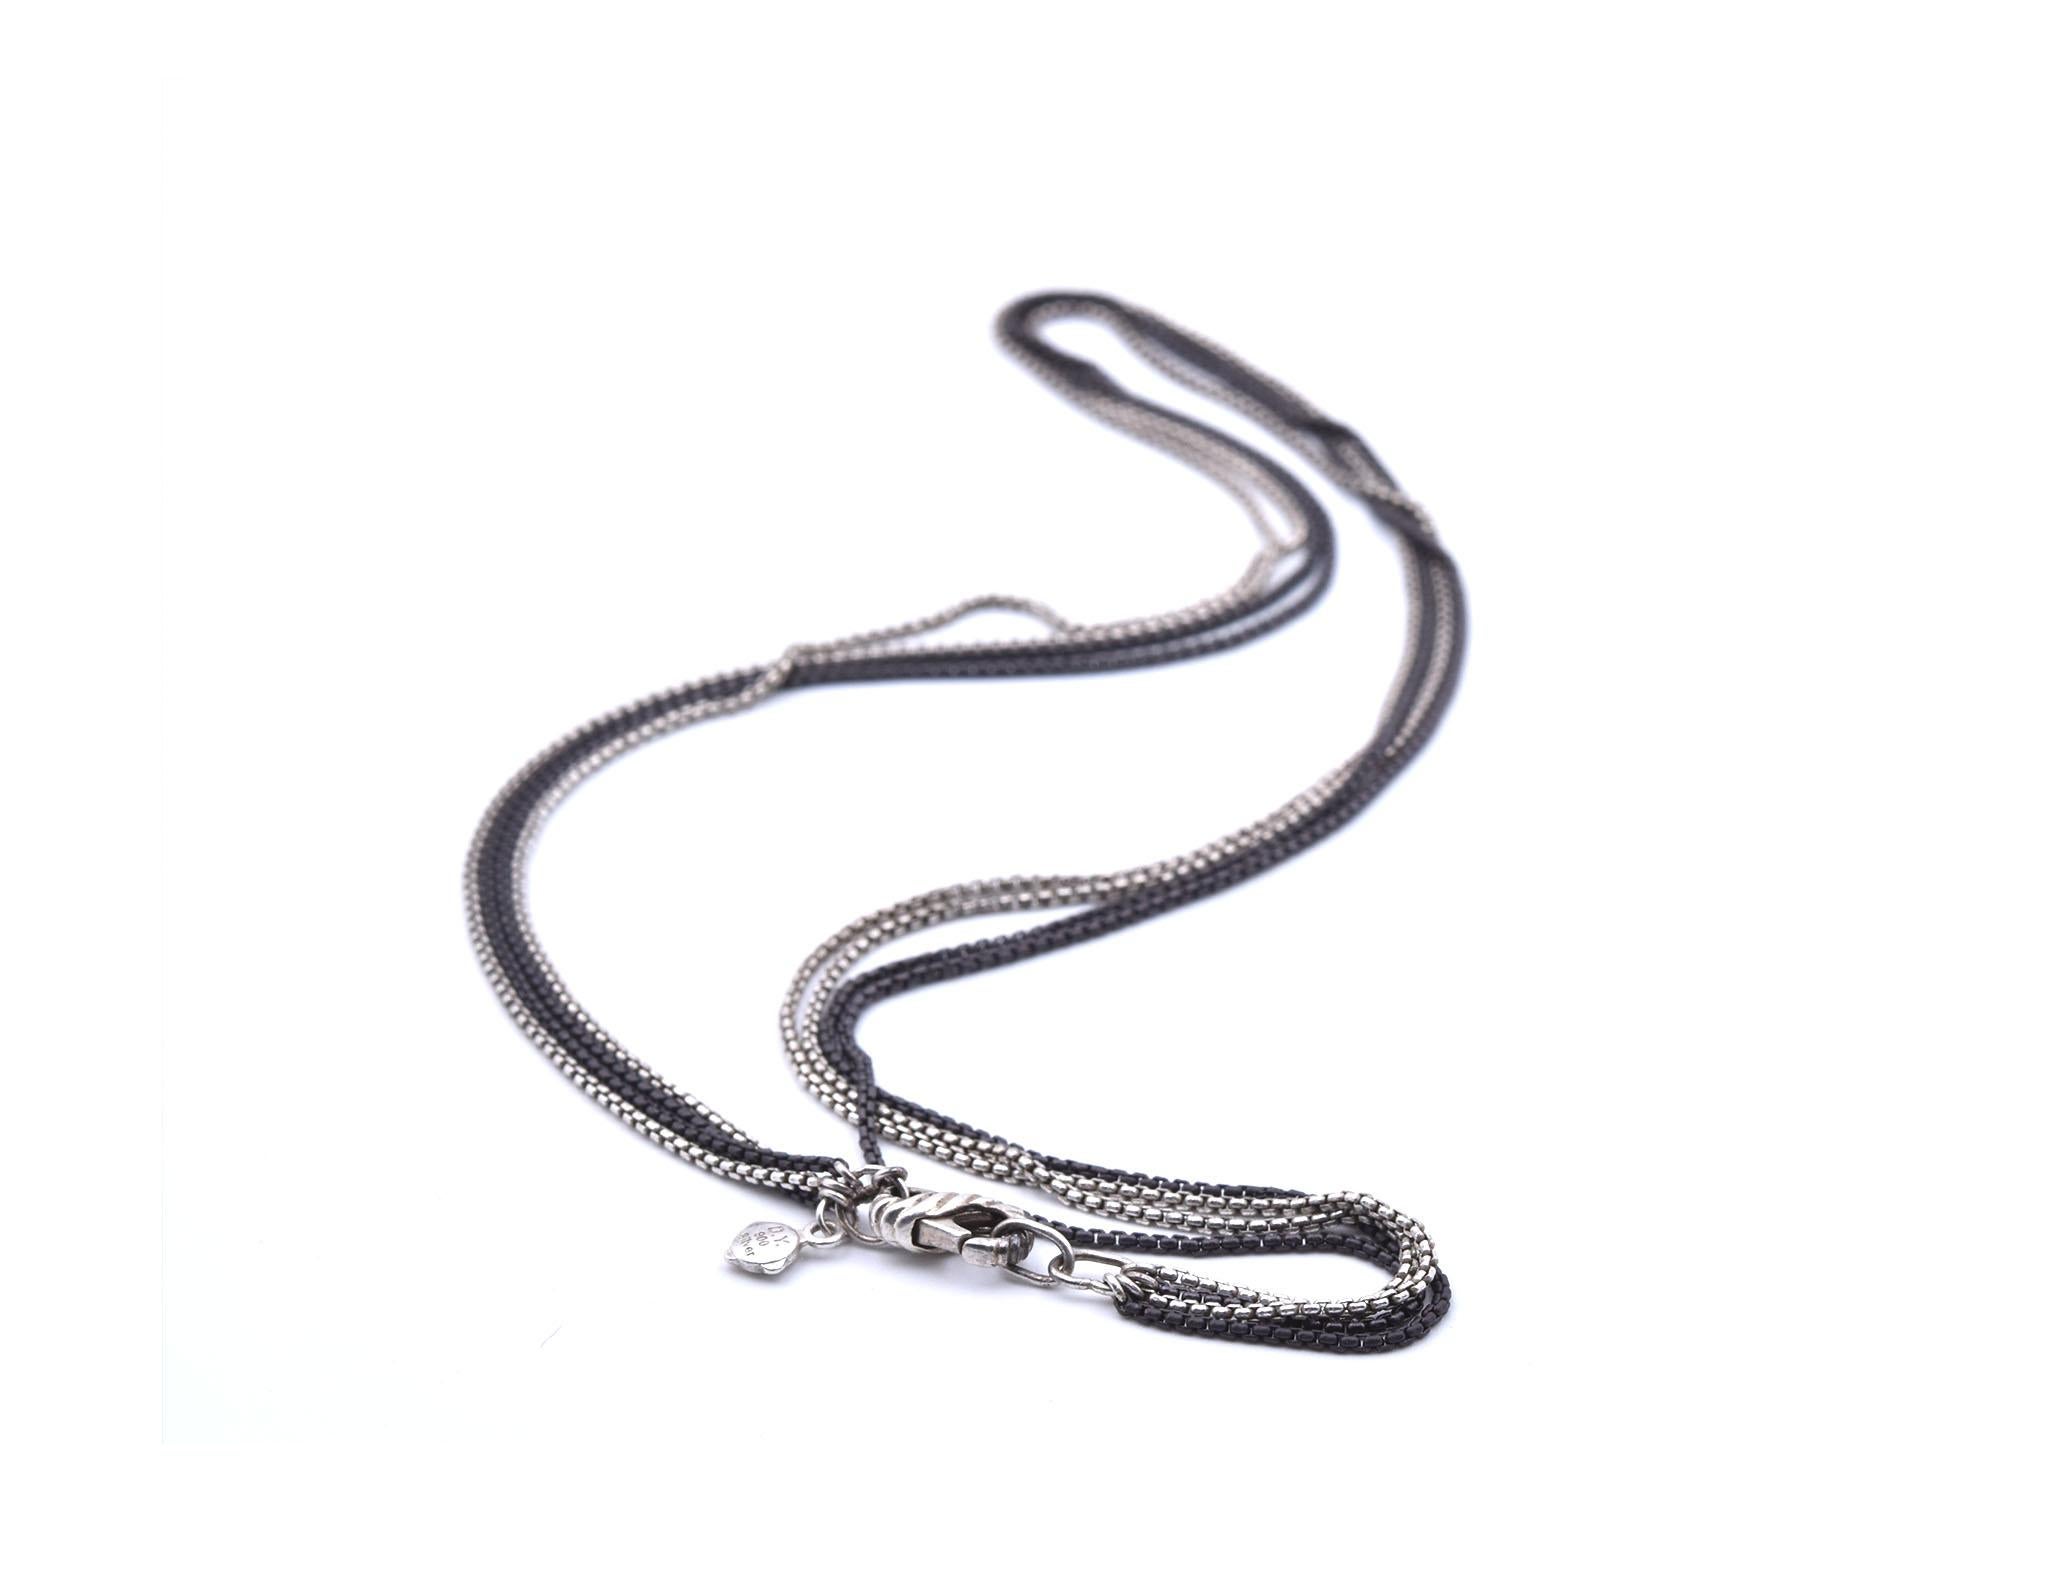 Designer: David Yurman
Material: sterling silver with black rhodium
Dimensions: necklace measures 16-inches in length
Weight: 12.56 grams